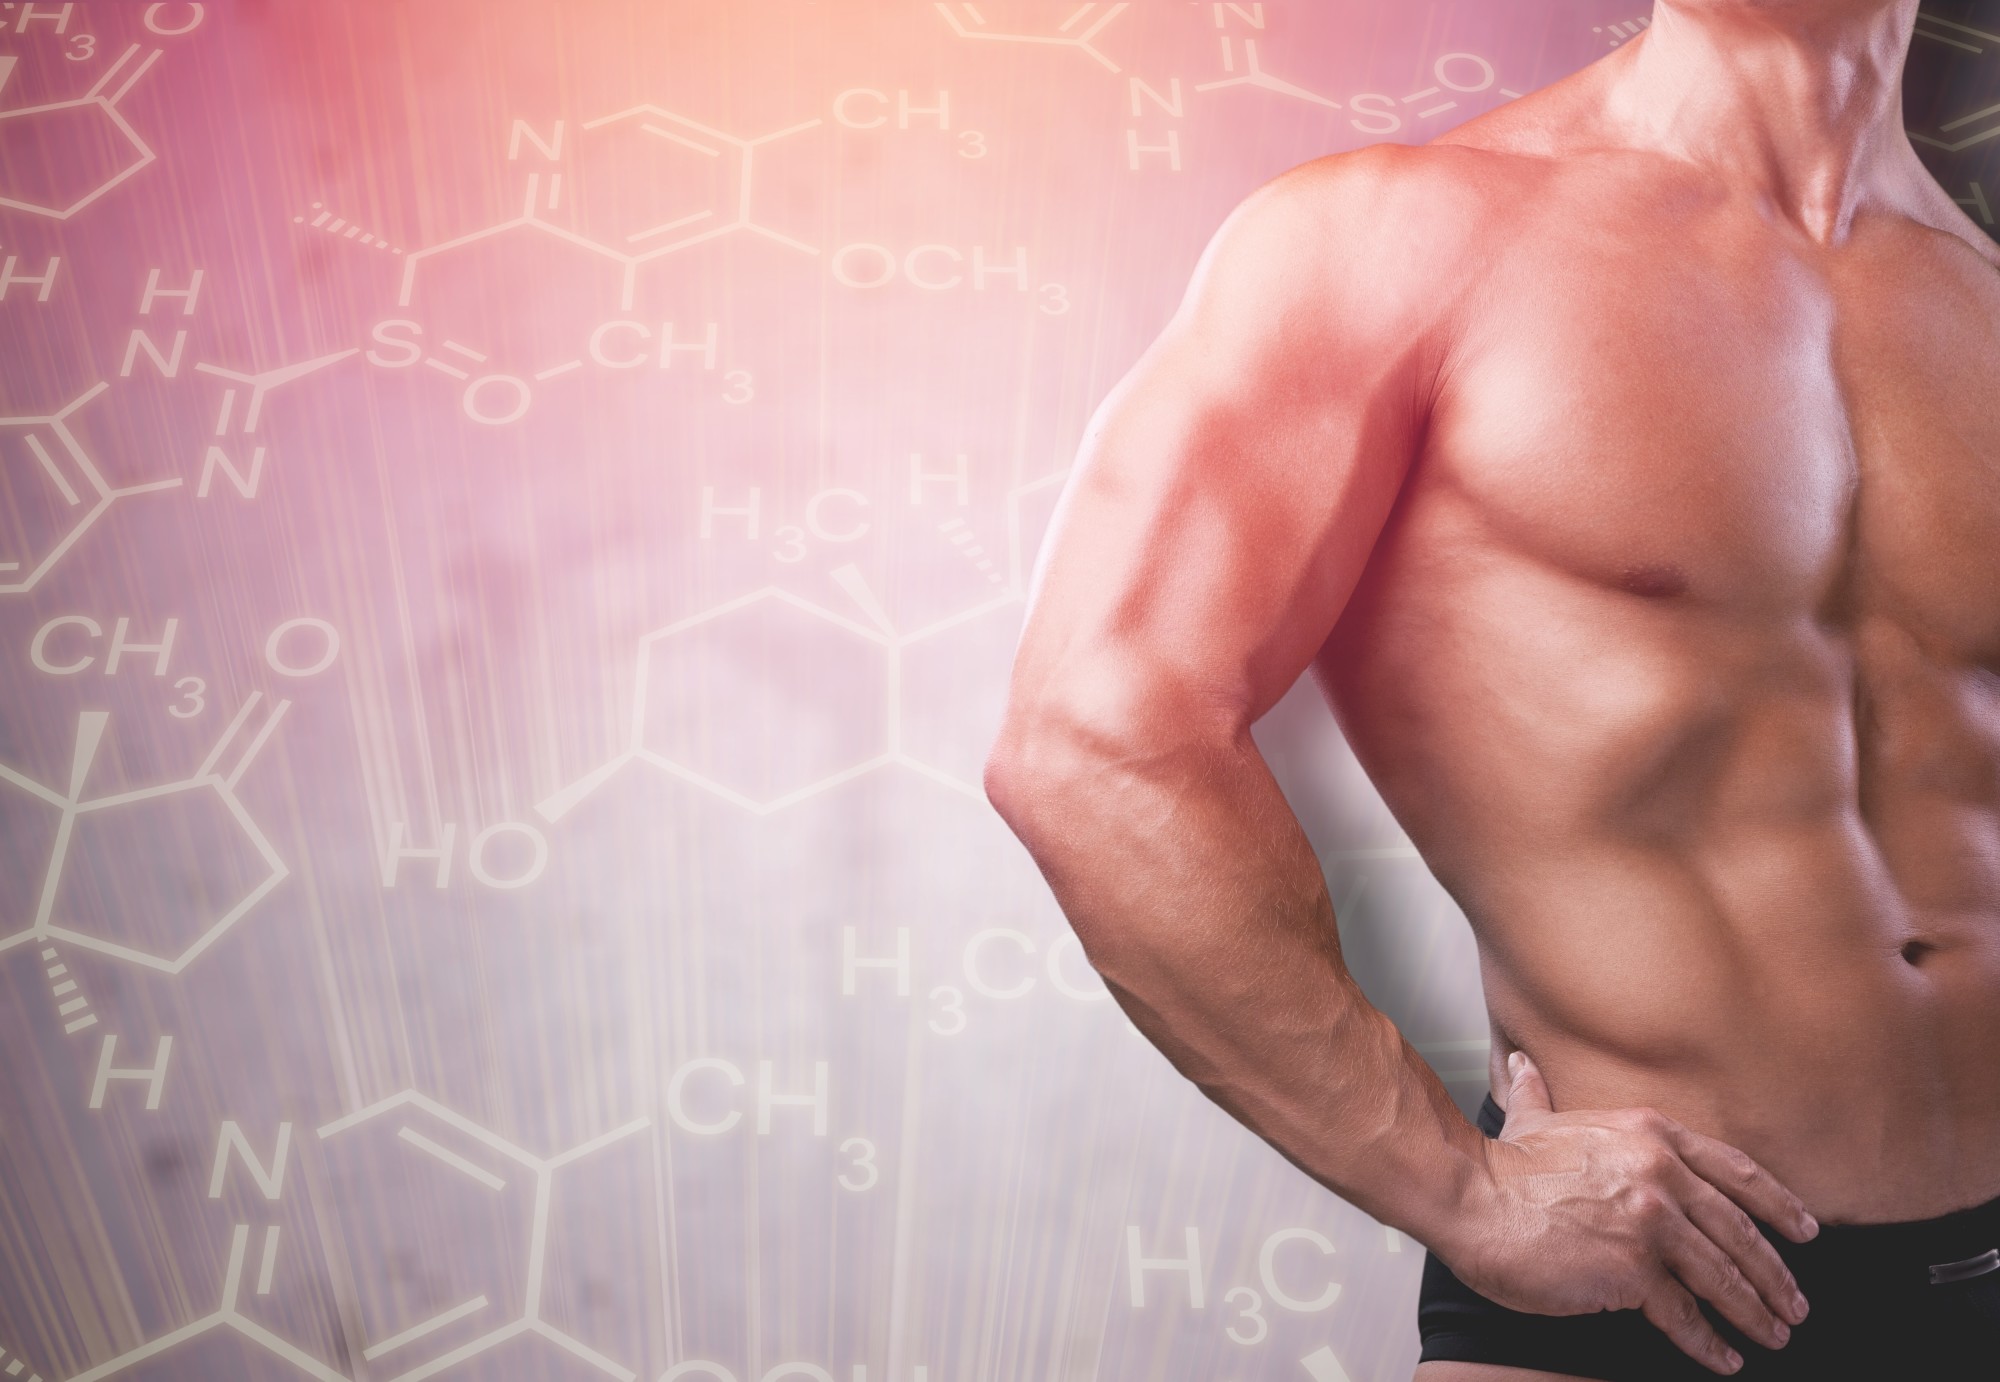 Are SARMs safe to use? Are SARMs effective? Do SARMs affect your brain? We turn to SARMs research to find out the truth.